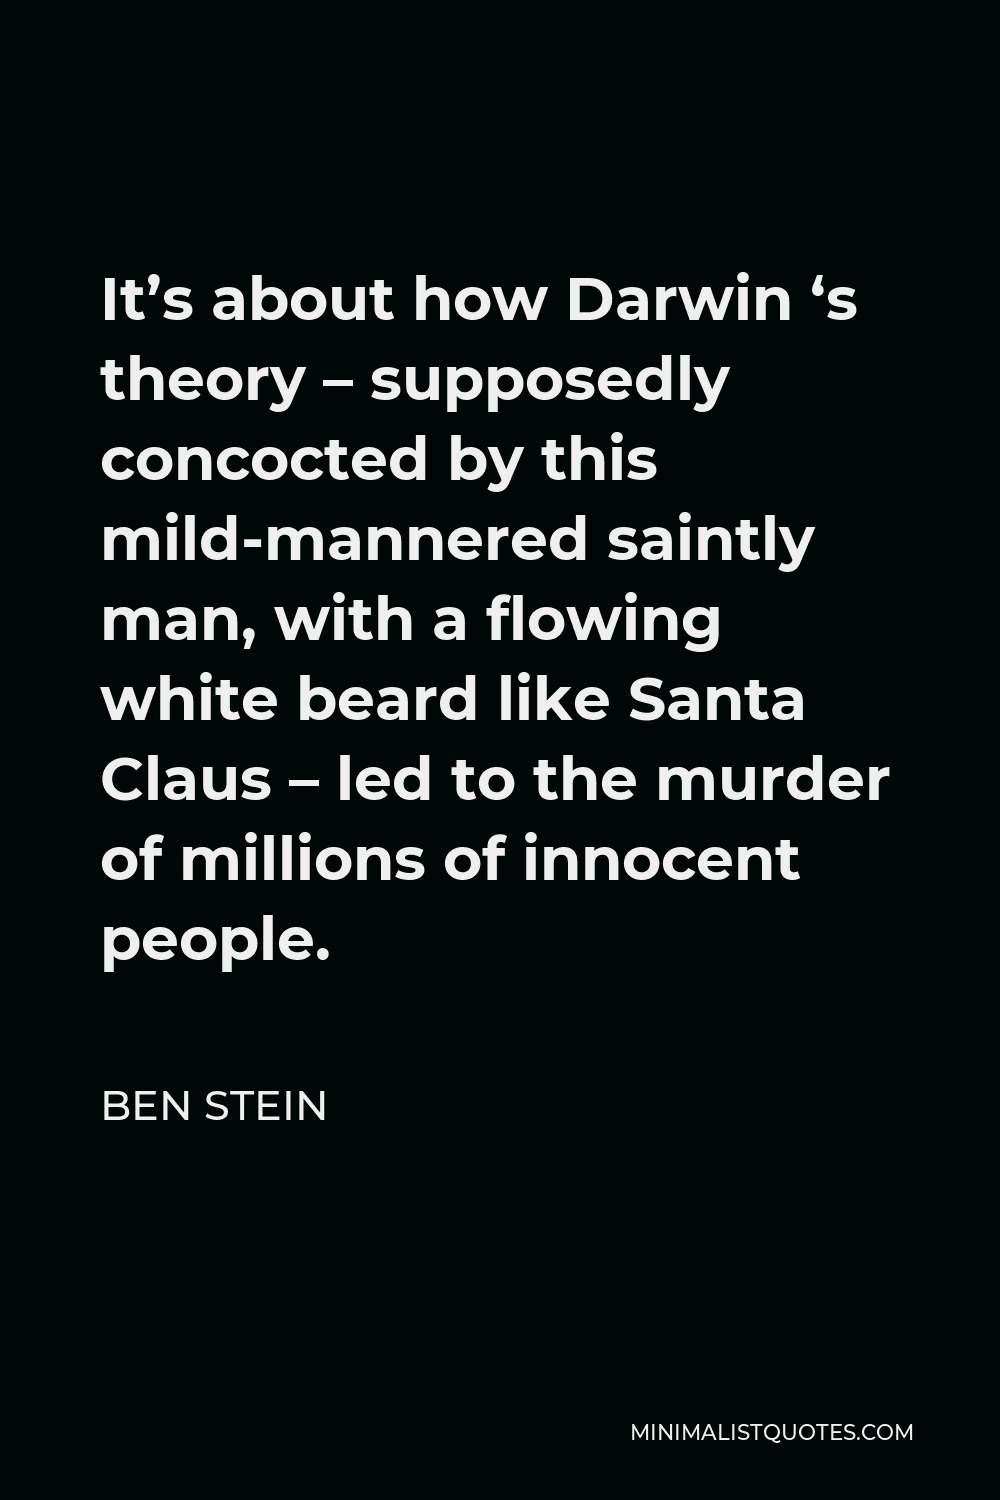 Ben Stein Quote - It’s about how Darwin ‘s theory – supposedly concocted by this mild-mannered saintly man, with a flowing white beard like Santa Claus – led to the murder of millions of innocent people.